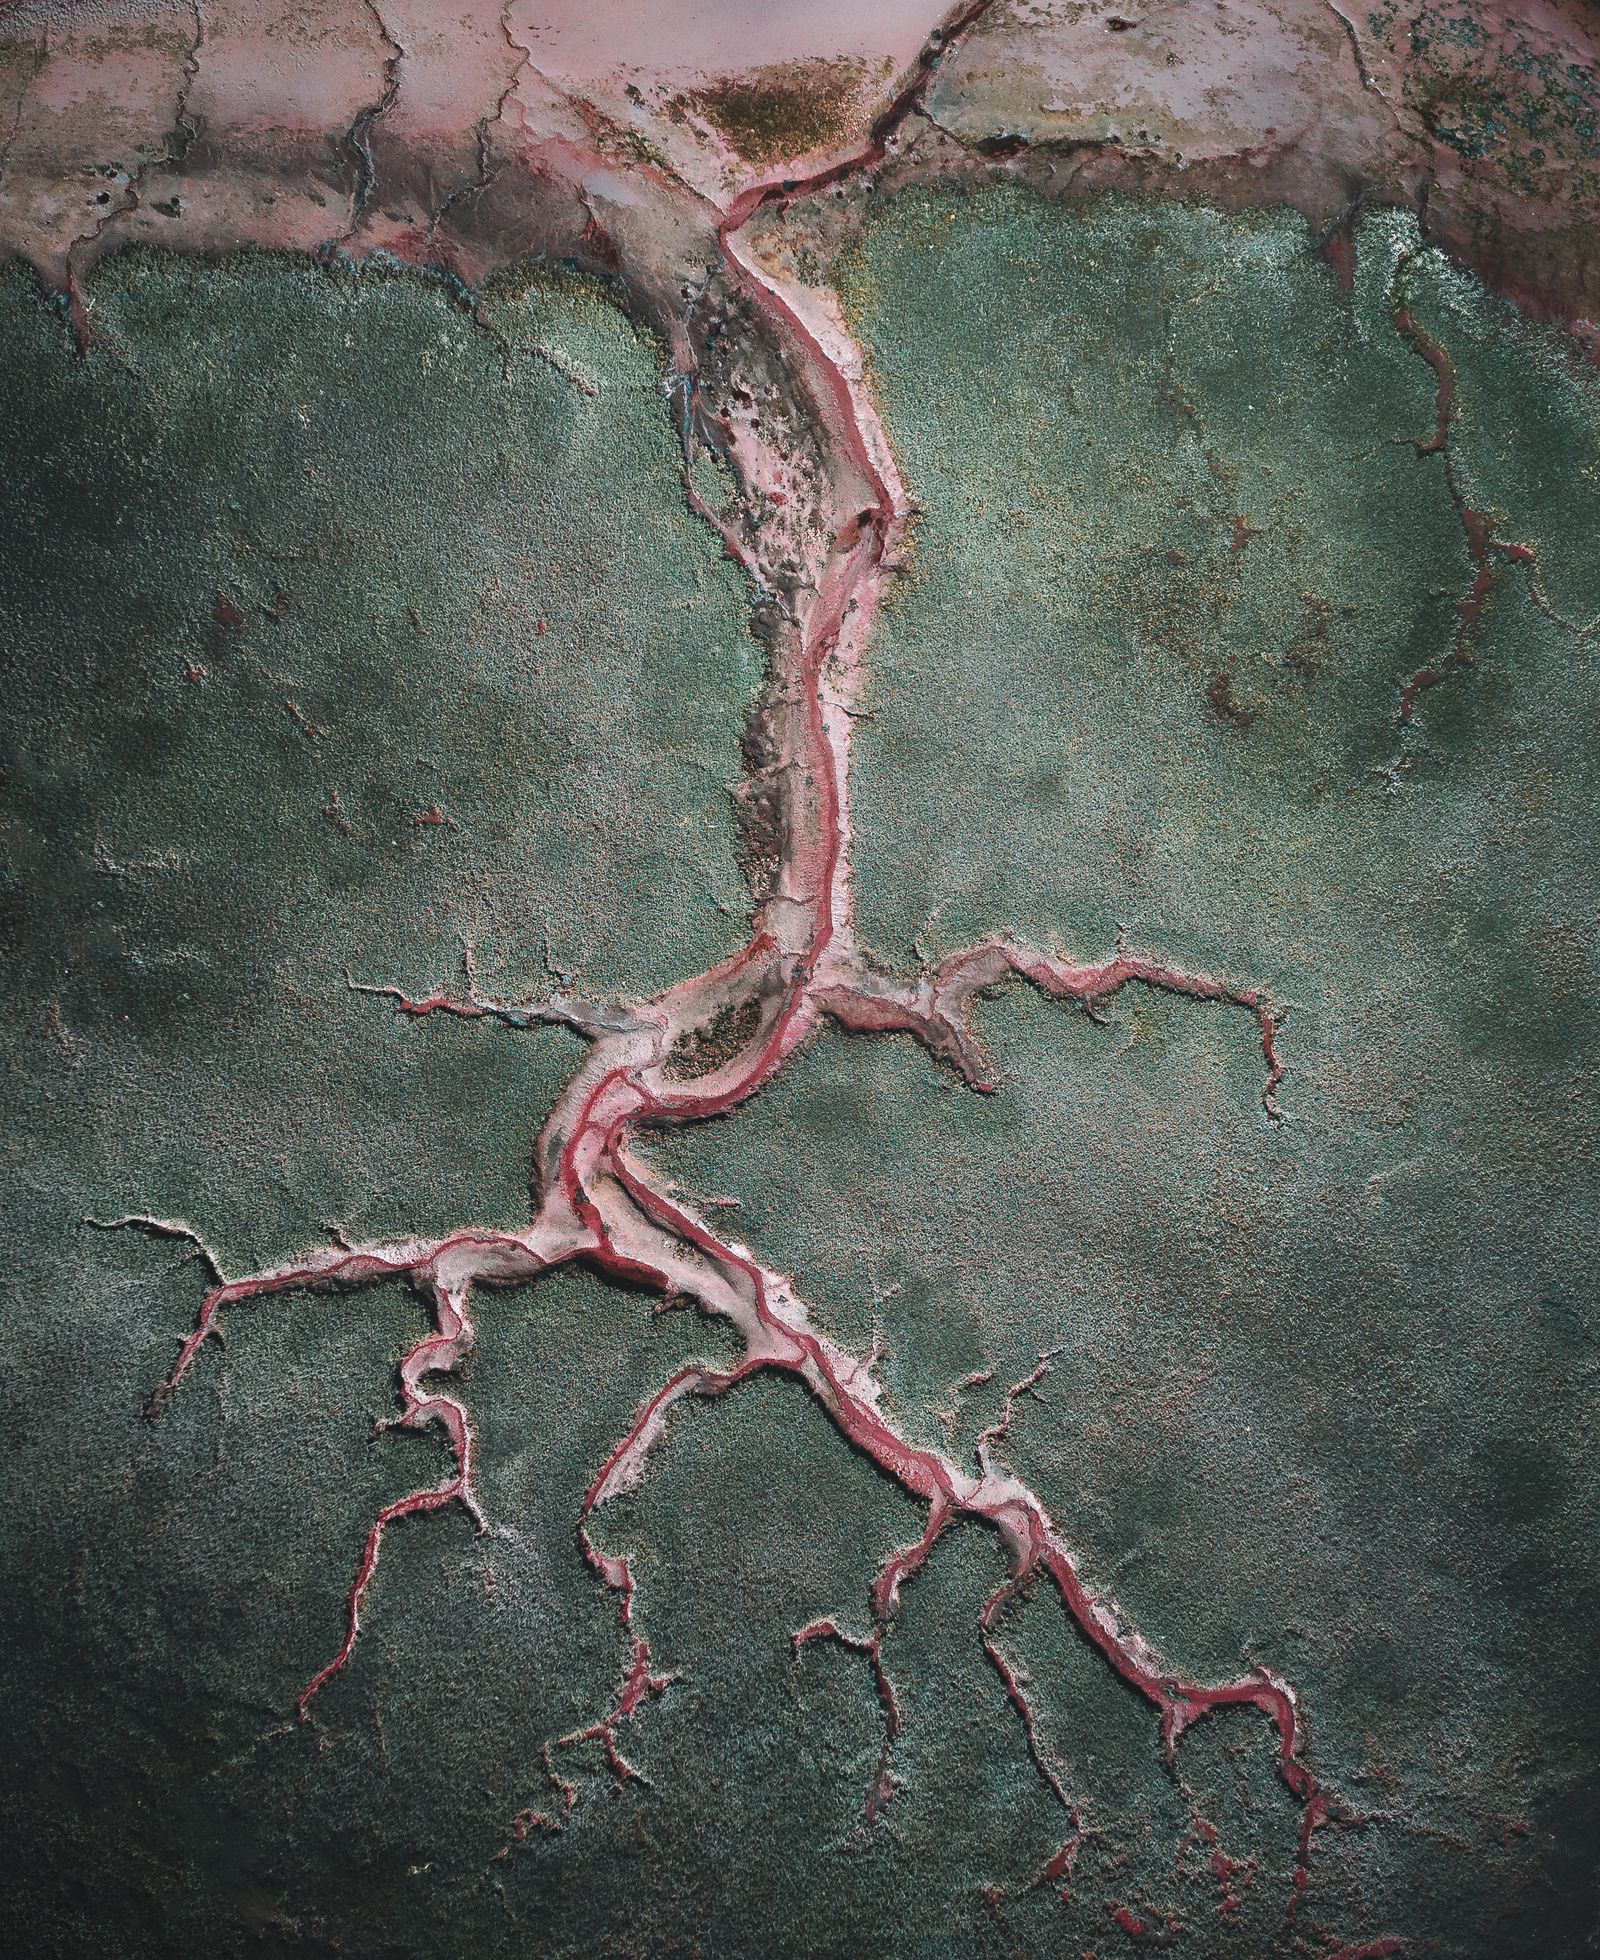 Blood vessels of the earth